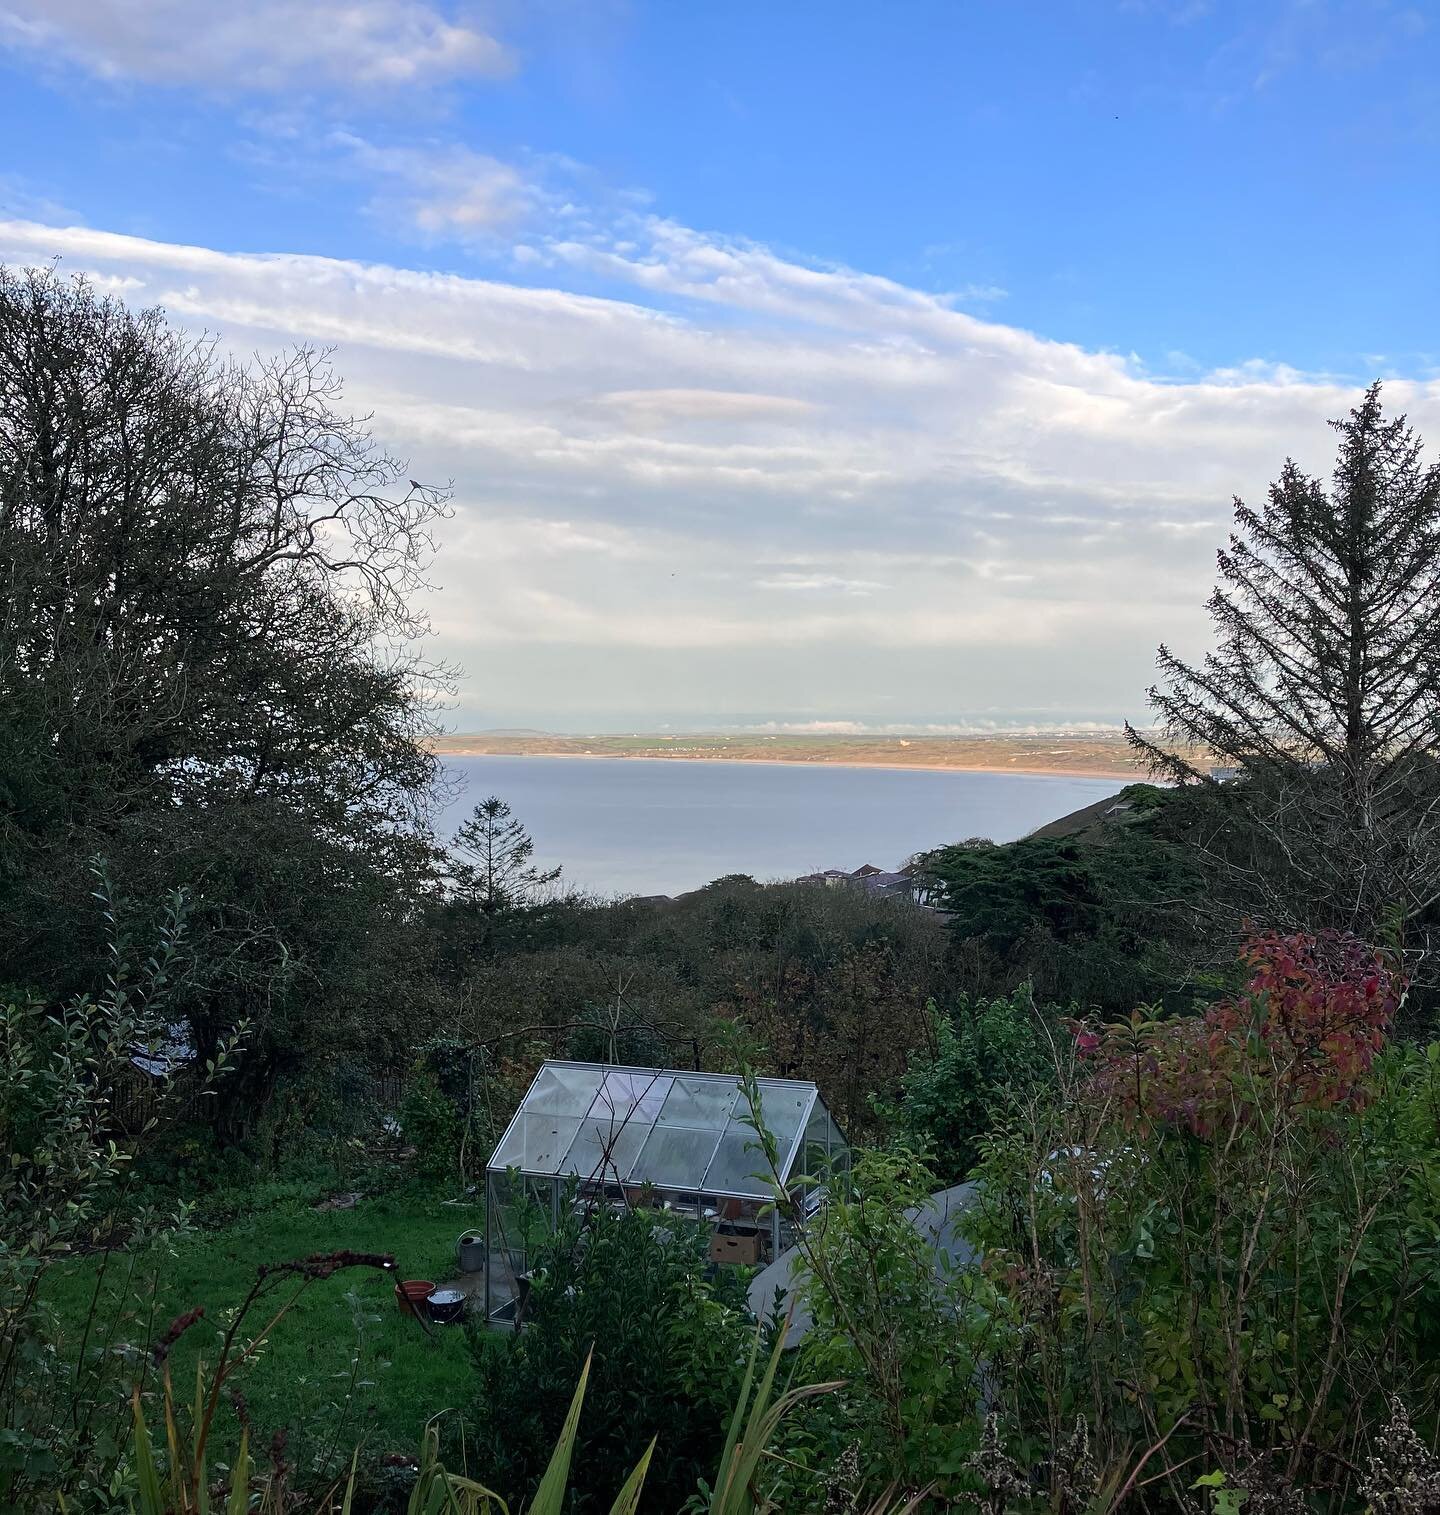 This view has been a part of our family&rsquo;s life as long as we can remember. Our great-aunt inherited Sycamore Cottage in Carbis Bay in the early 1920&rsquo;s, and passed it on to her niece and our aunt about forty years later. The town has grown